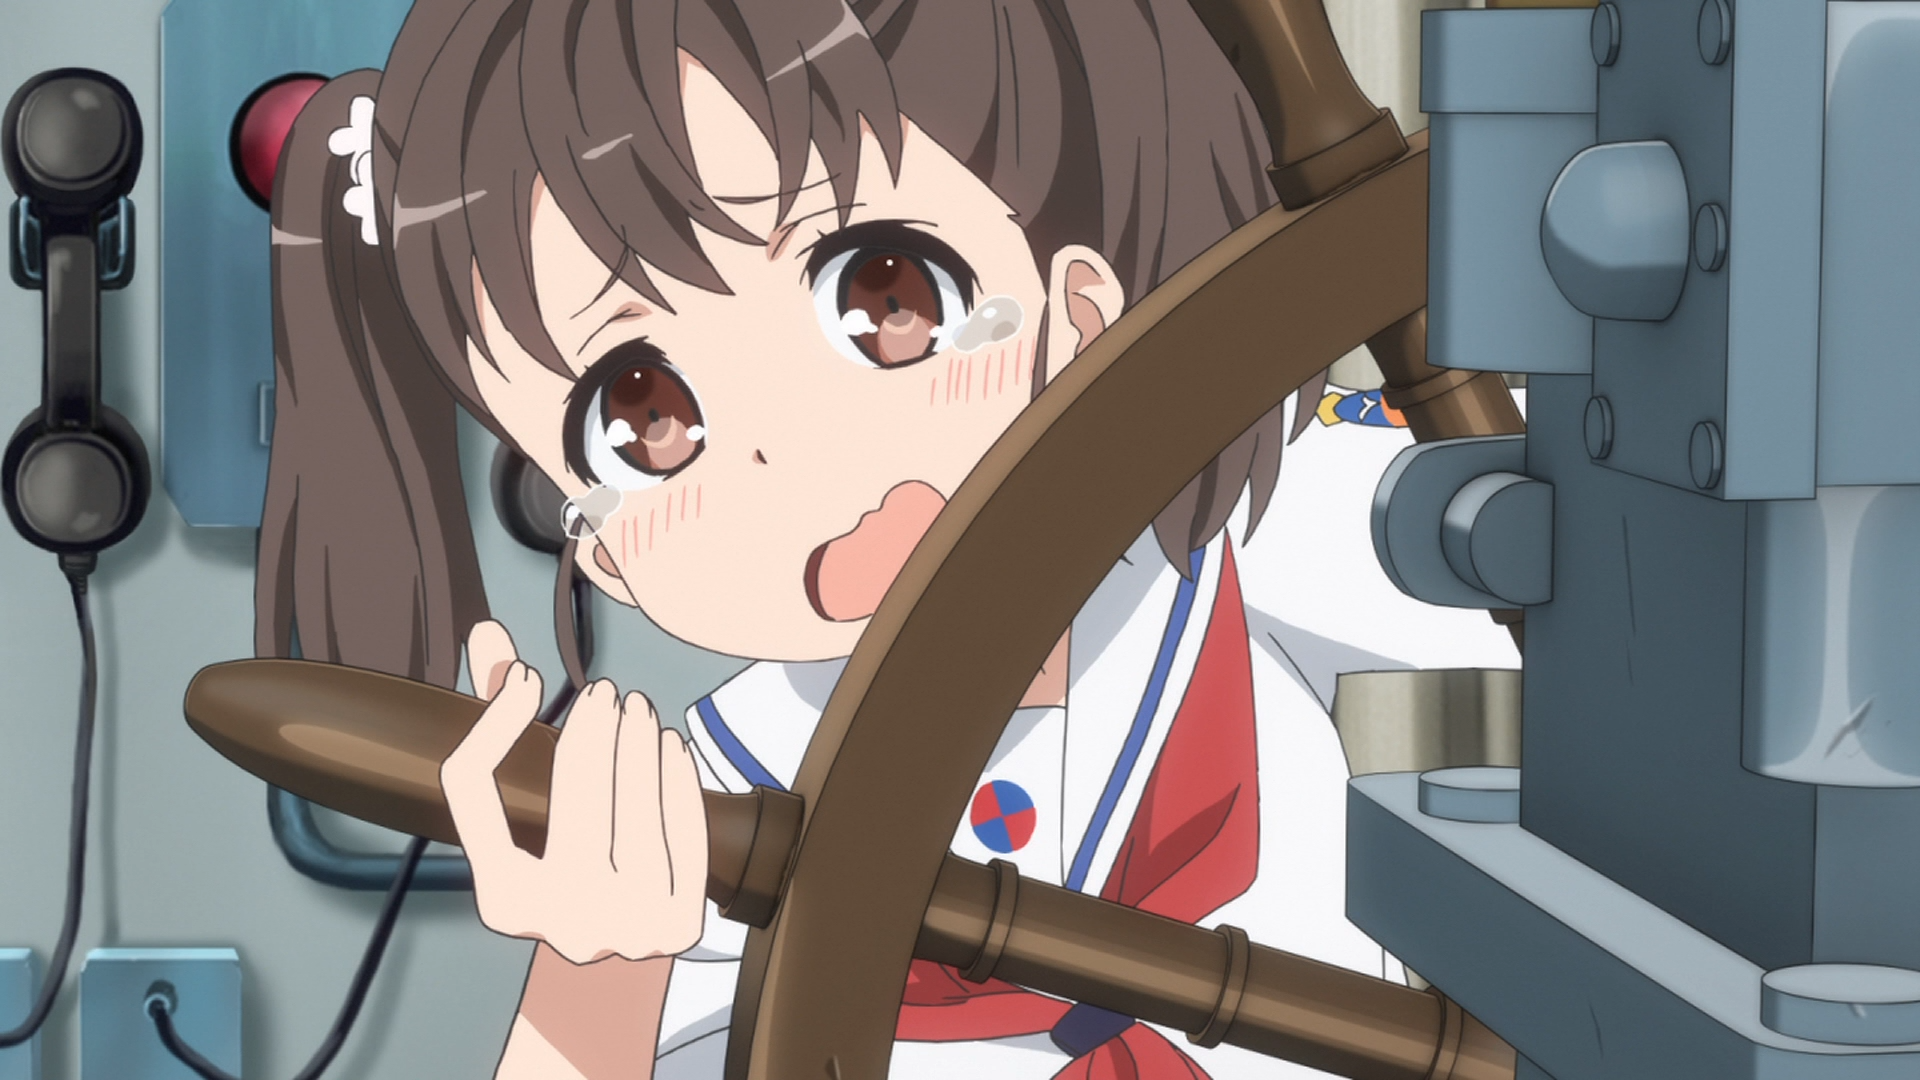 High school student Rin Shiretoko anxiously mans the helm of the destroyer class ship Harekaze in a scene from the 2016 High School Fleet TV anime.